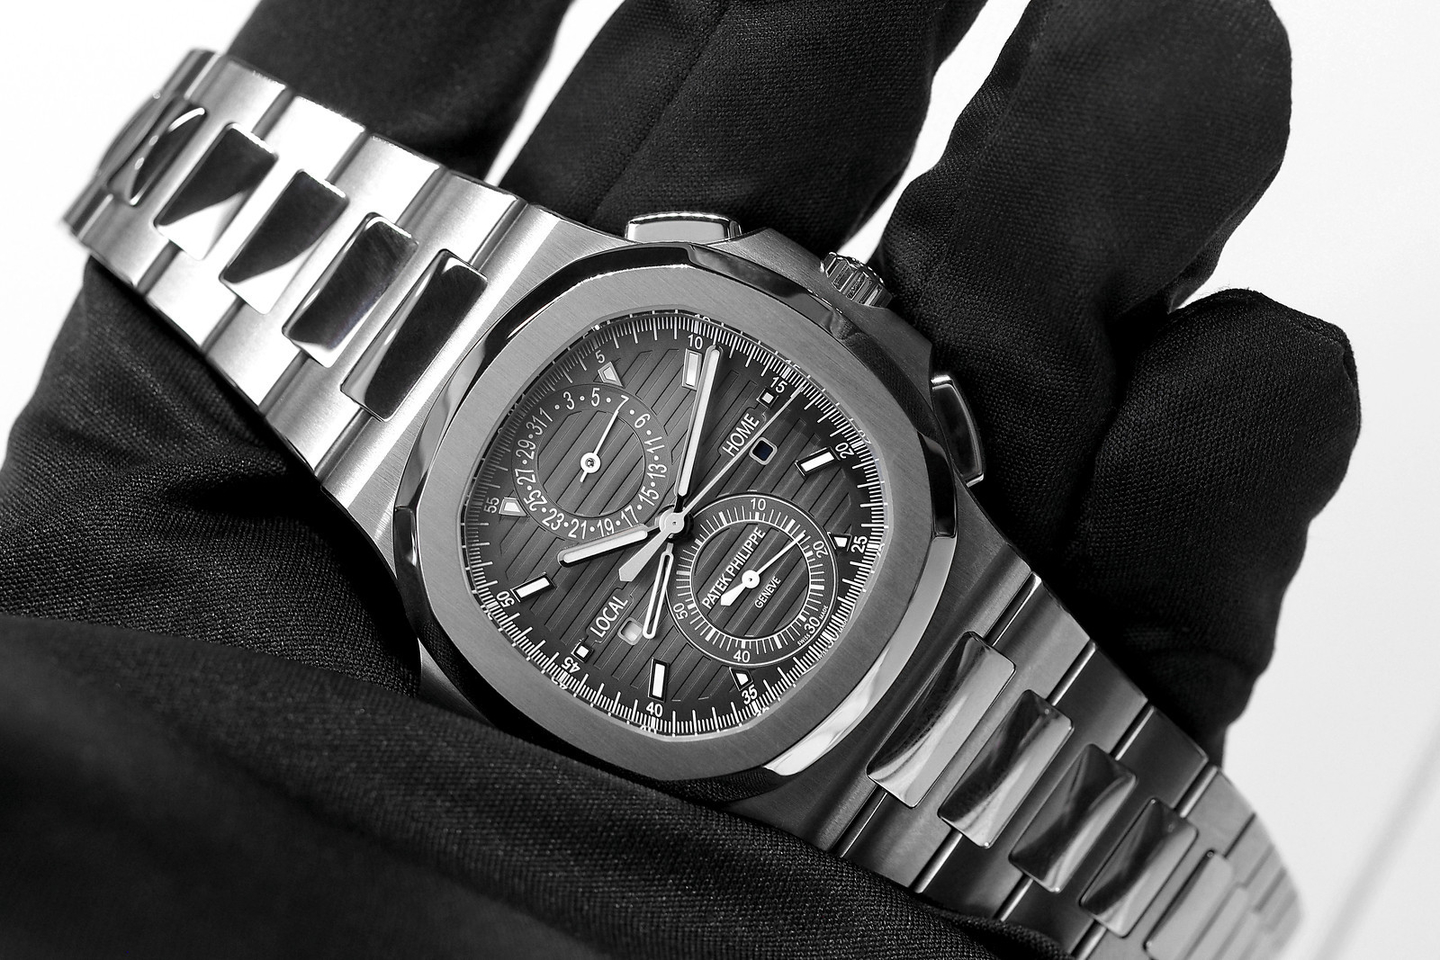 Hands-On with the Patek Philippe Nautilus Chronograph Travel Time 5990A